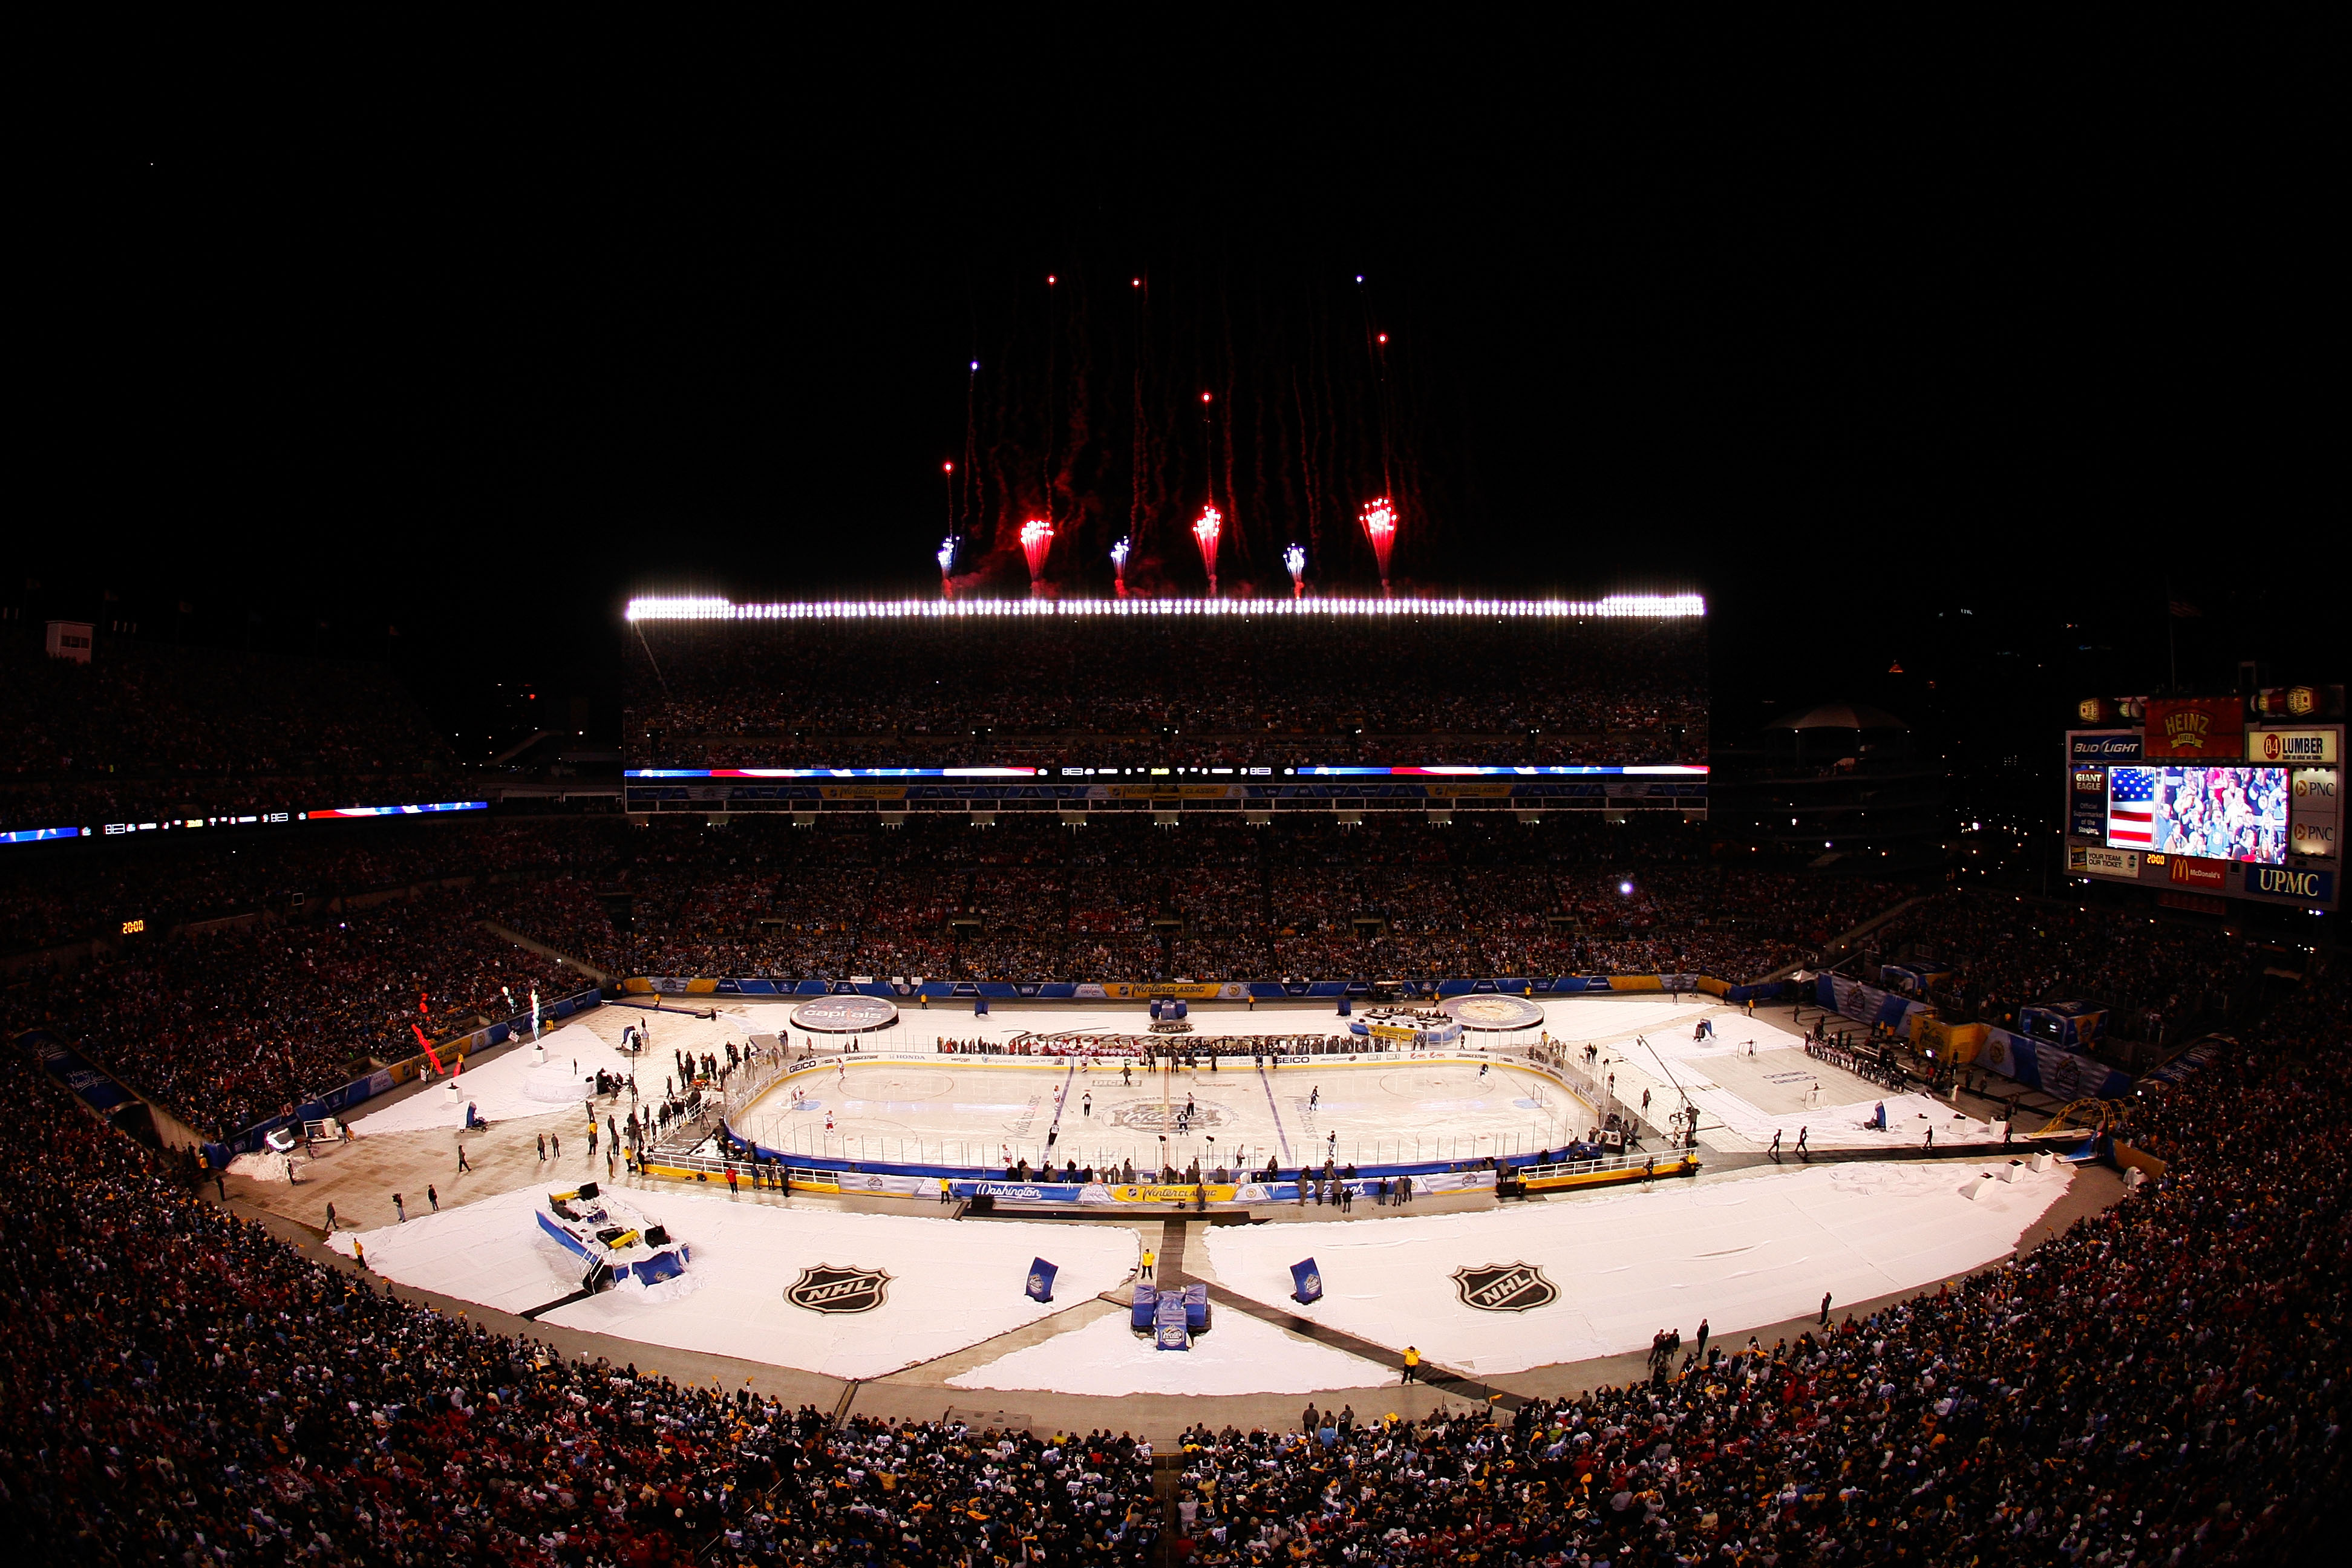 The 2011 NHL Winter Classic - Sports Illustrated